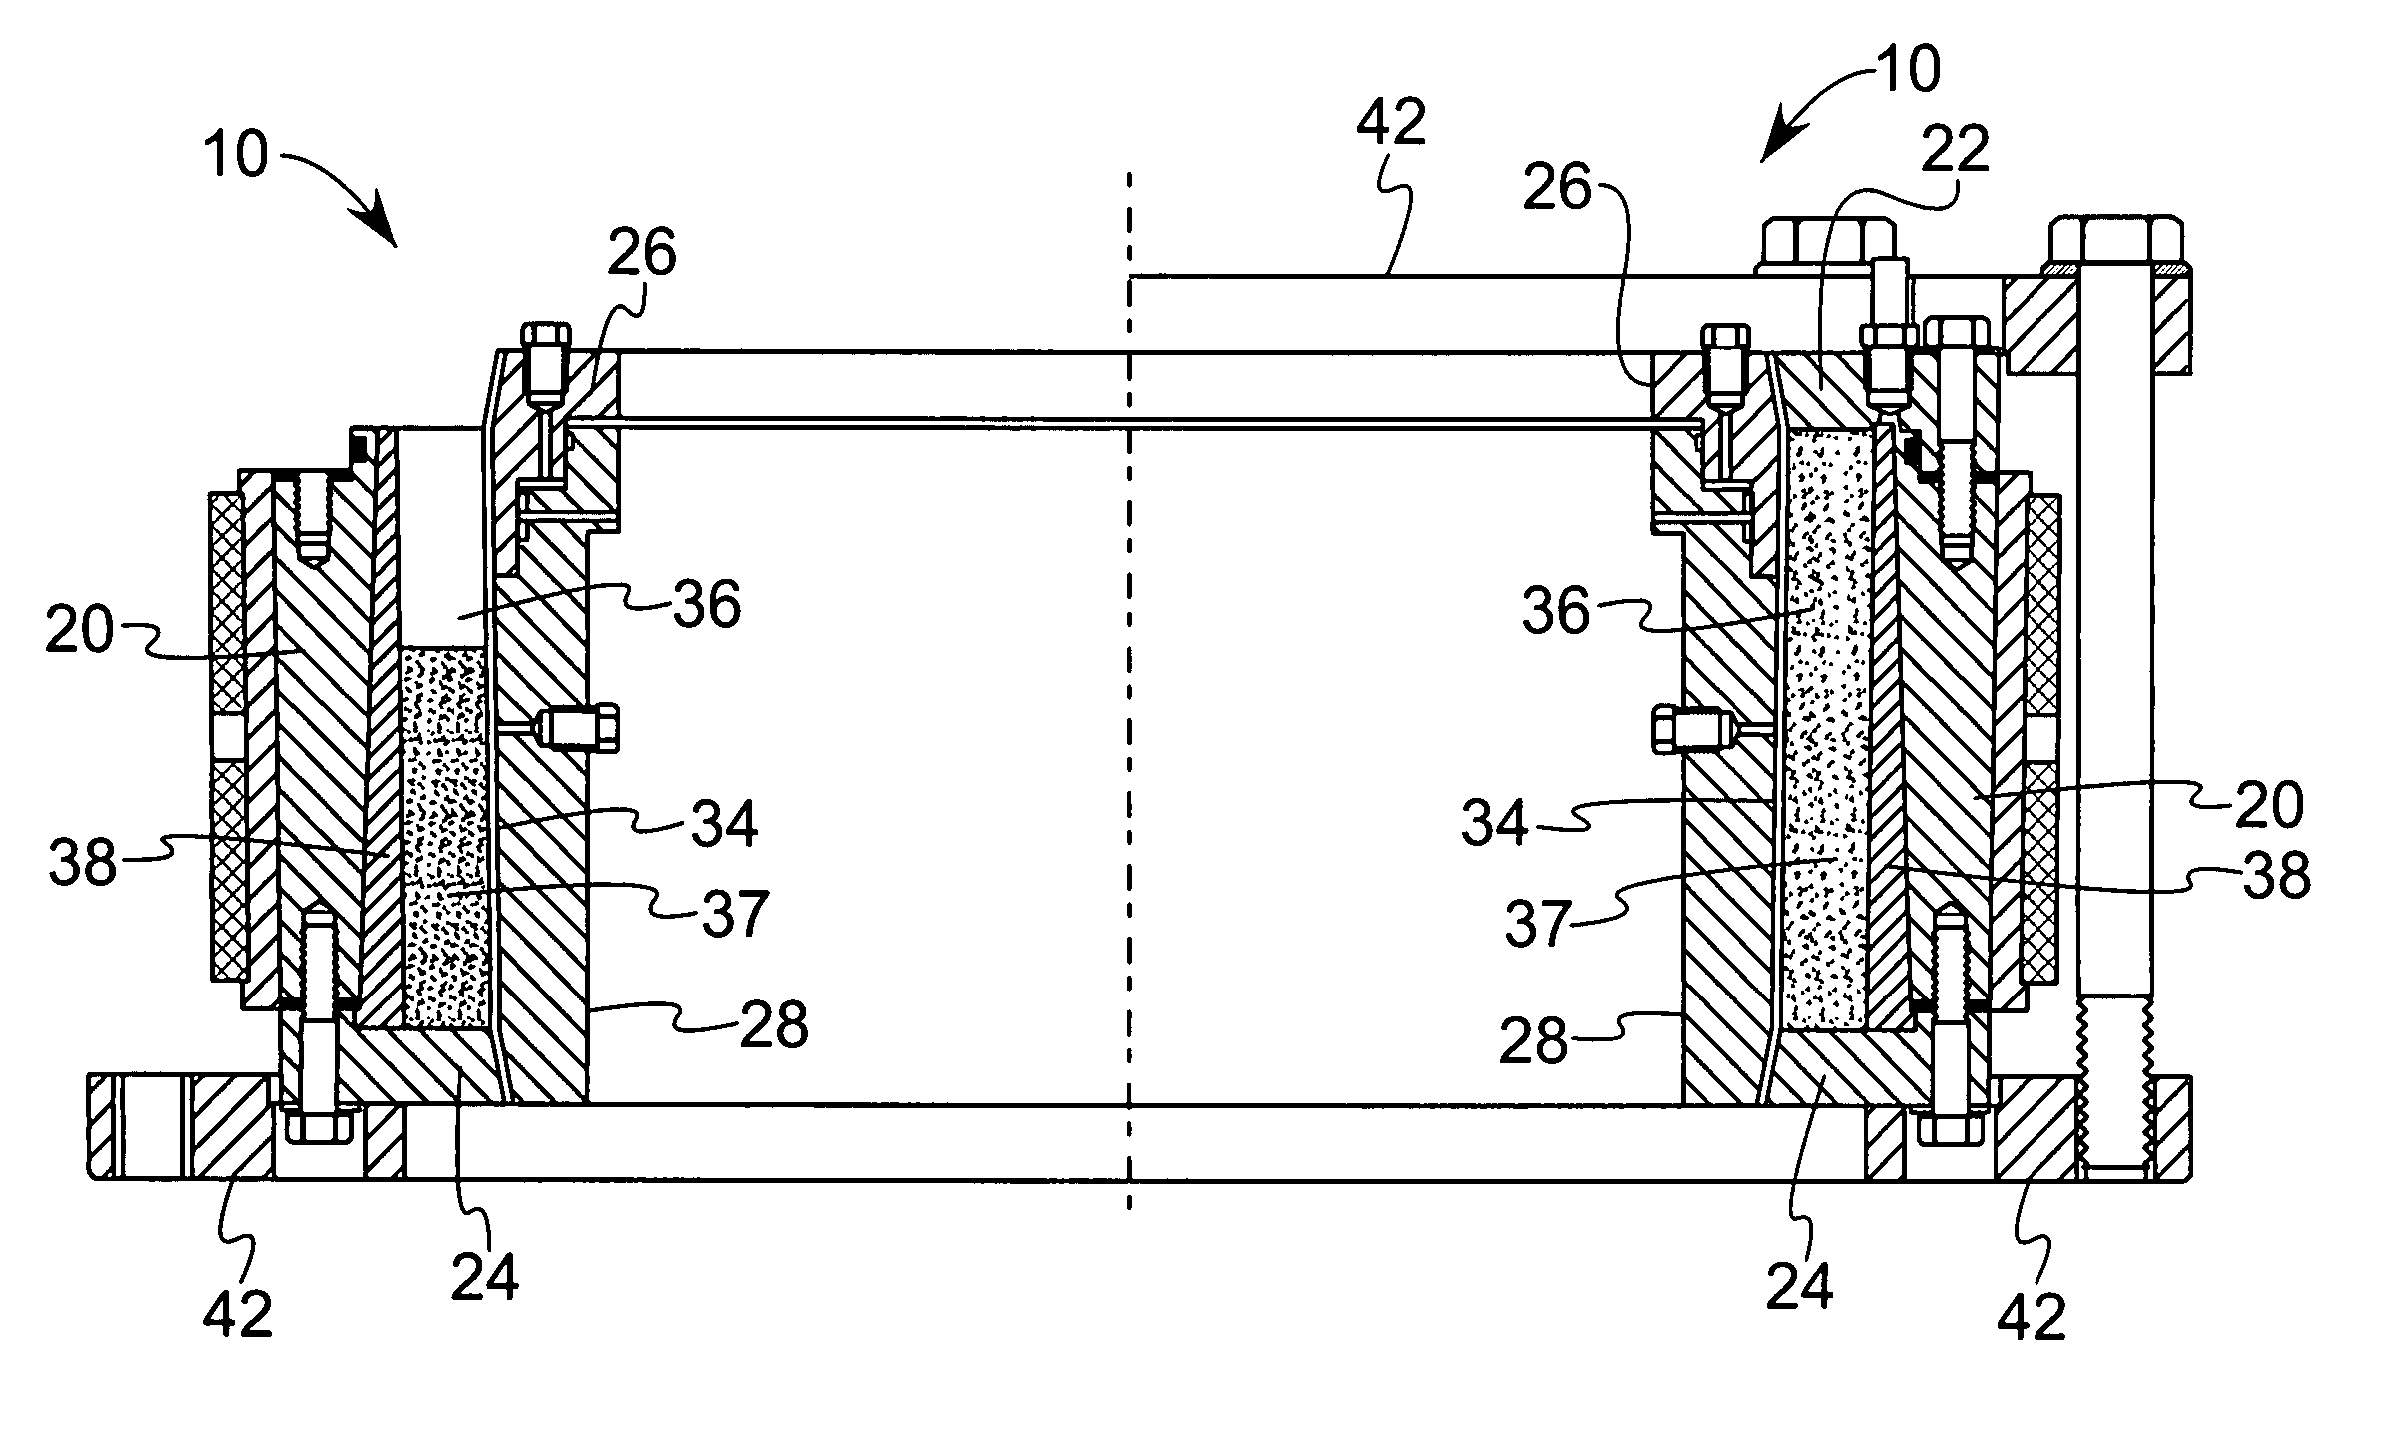 Apparatus and method for manufacturing abrasive tools